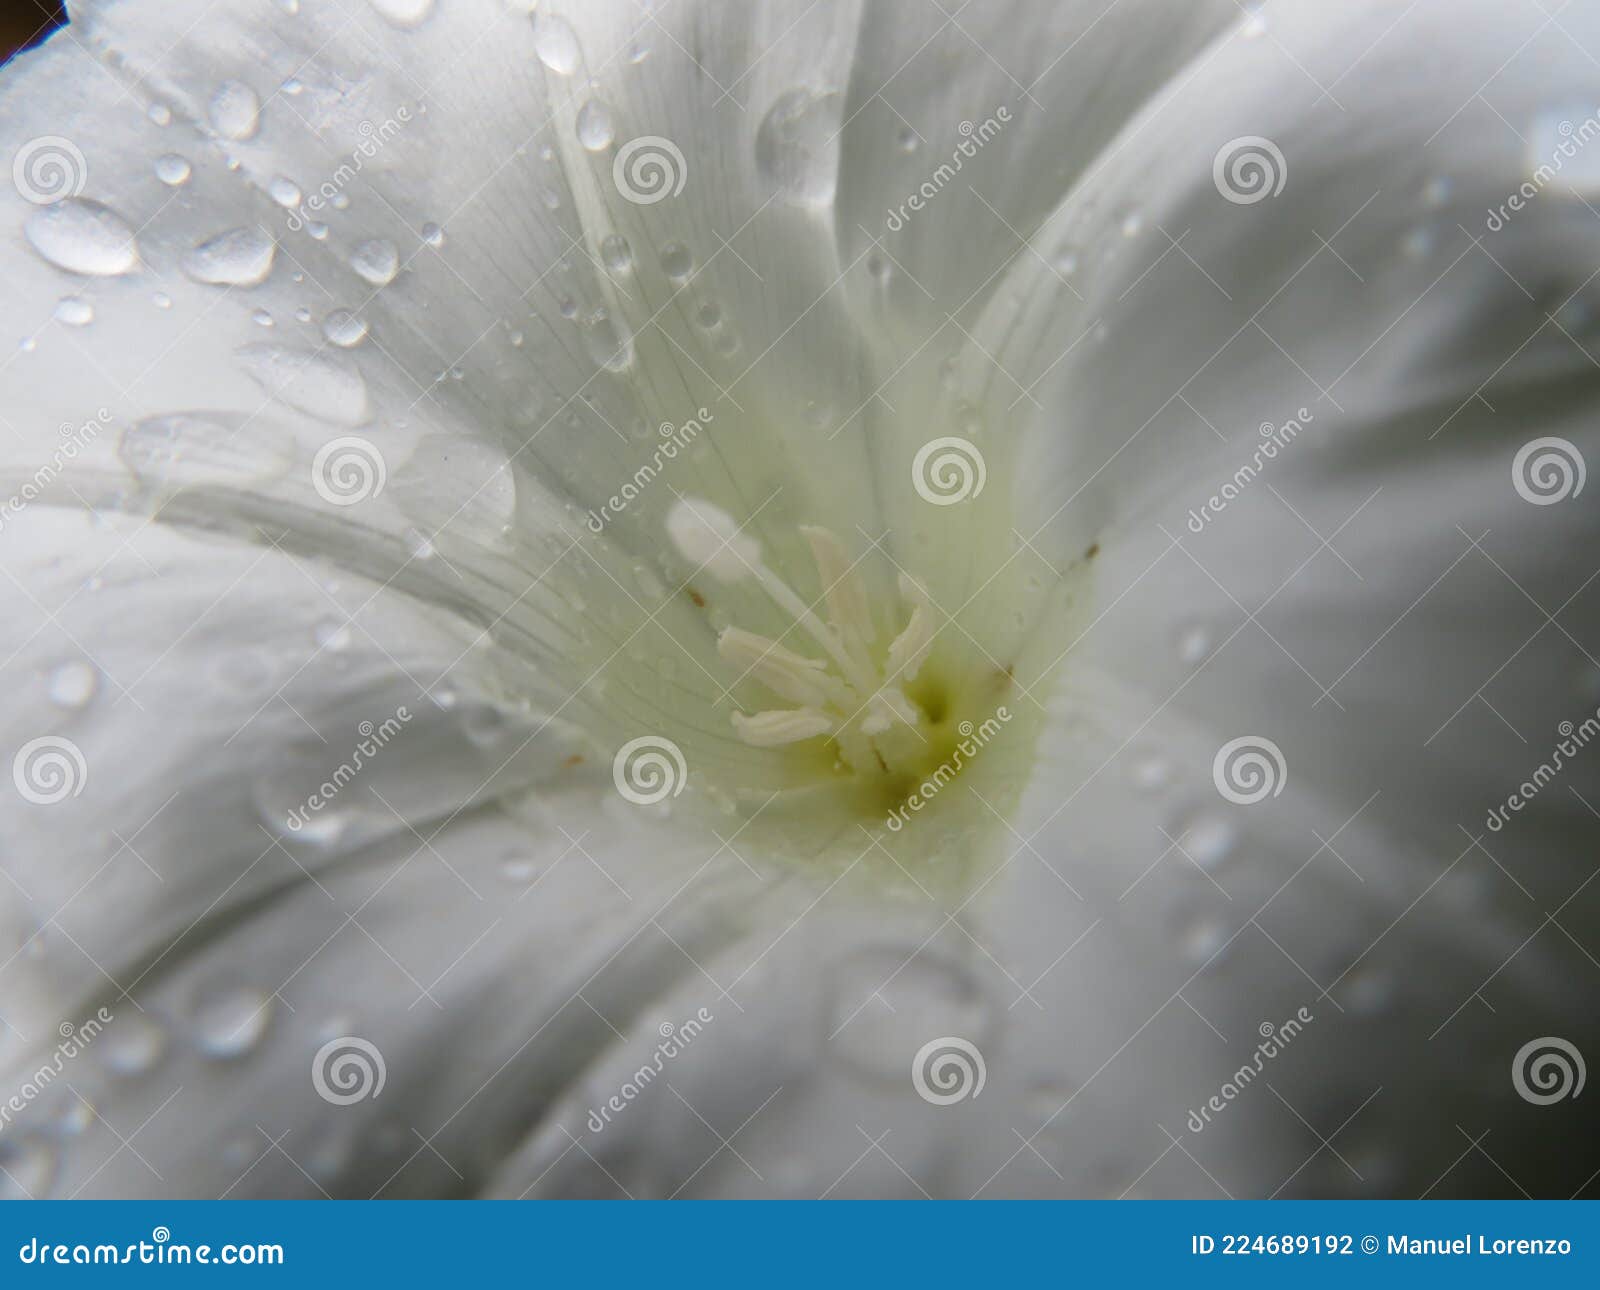 beautiful wet white flower with natural macro detail